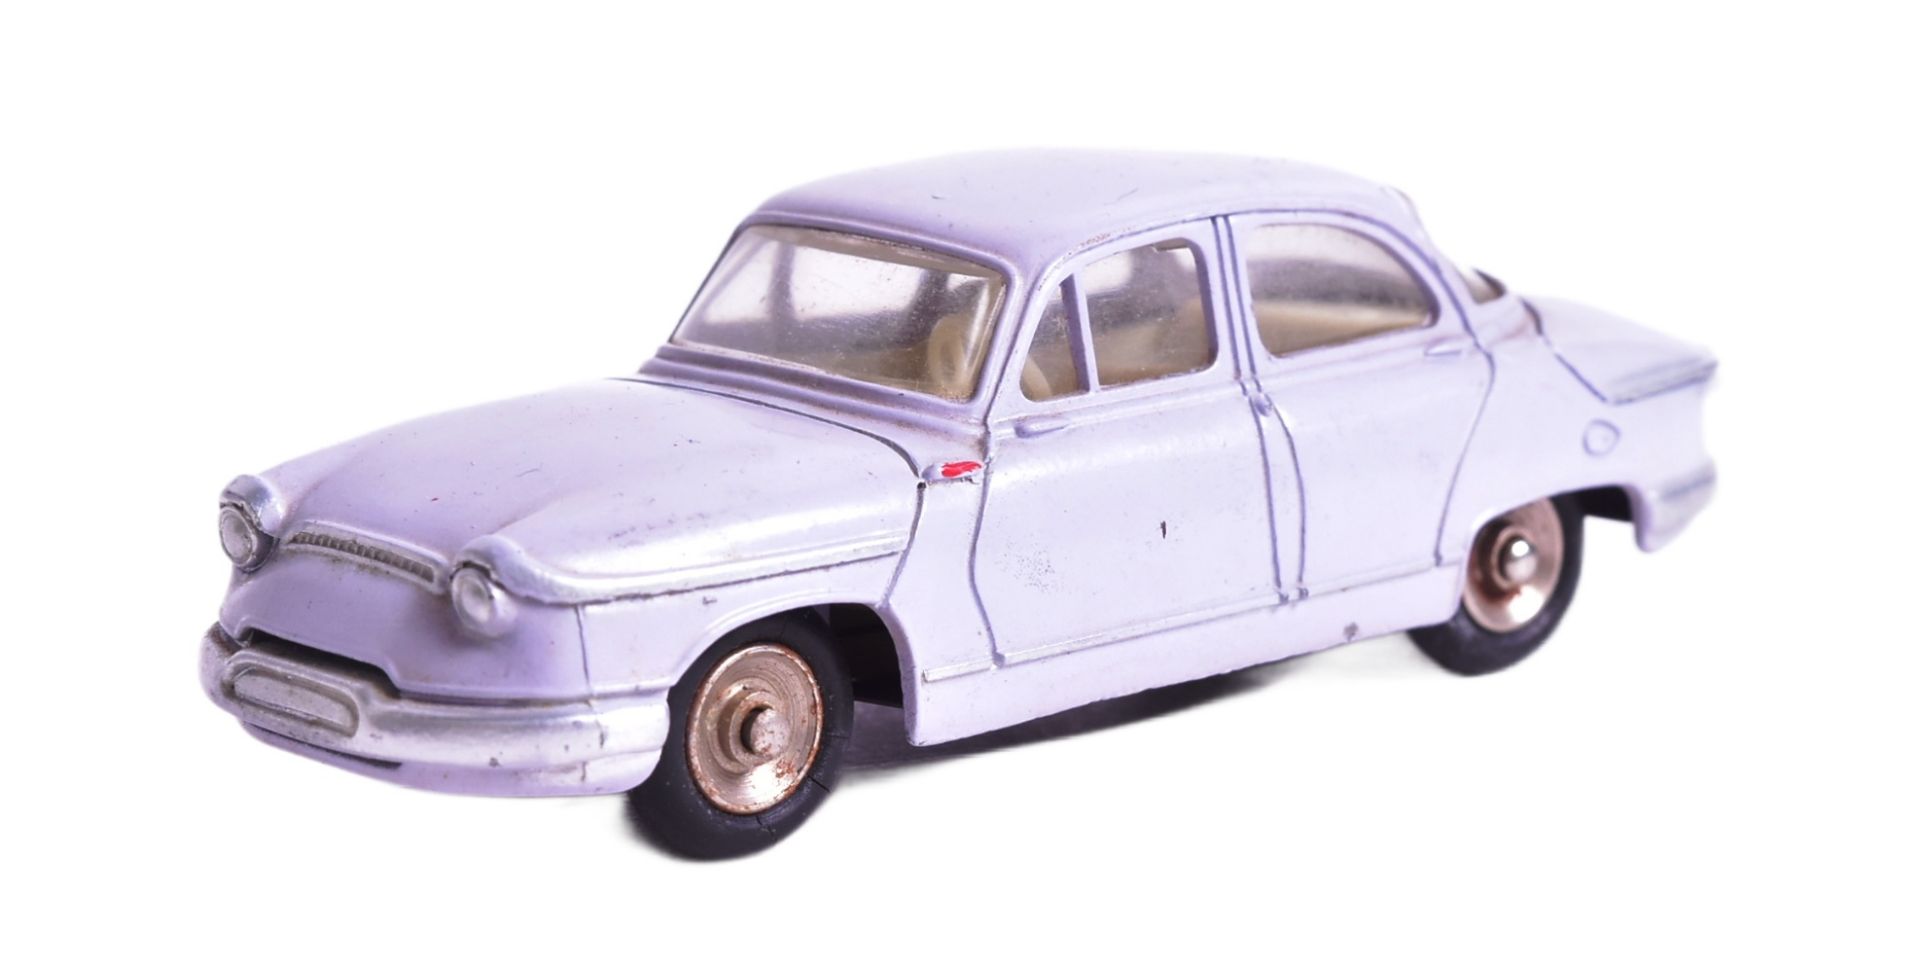 DIECAST - FRENCH DINKY TOYS - PANHARD PL 17